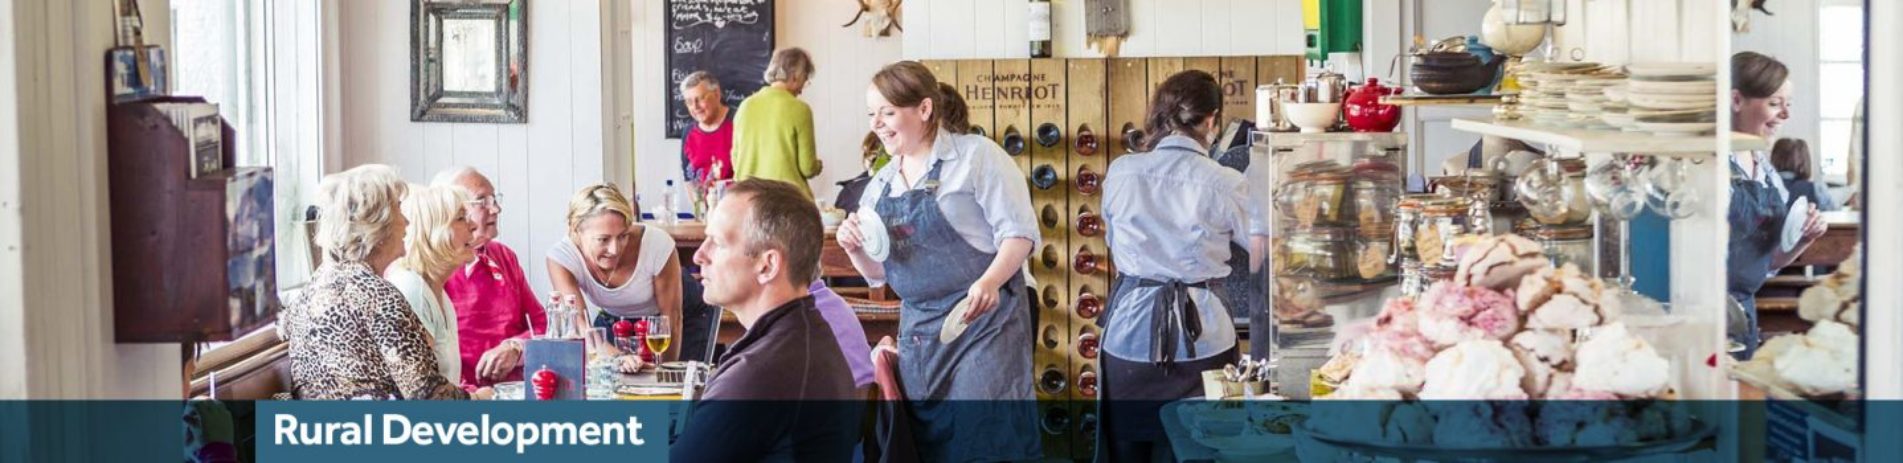 busy-tearoom-with-smiling-shop-assistant-chatting-to-seated-group-colourful-cakes-are-visible-on-right-and-blue-banner-underneath-reading-rural-development